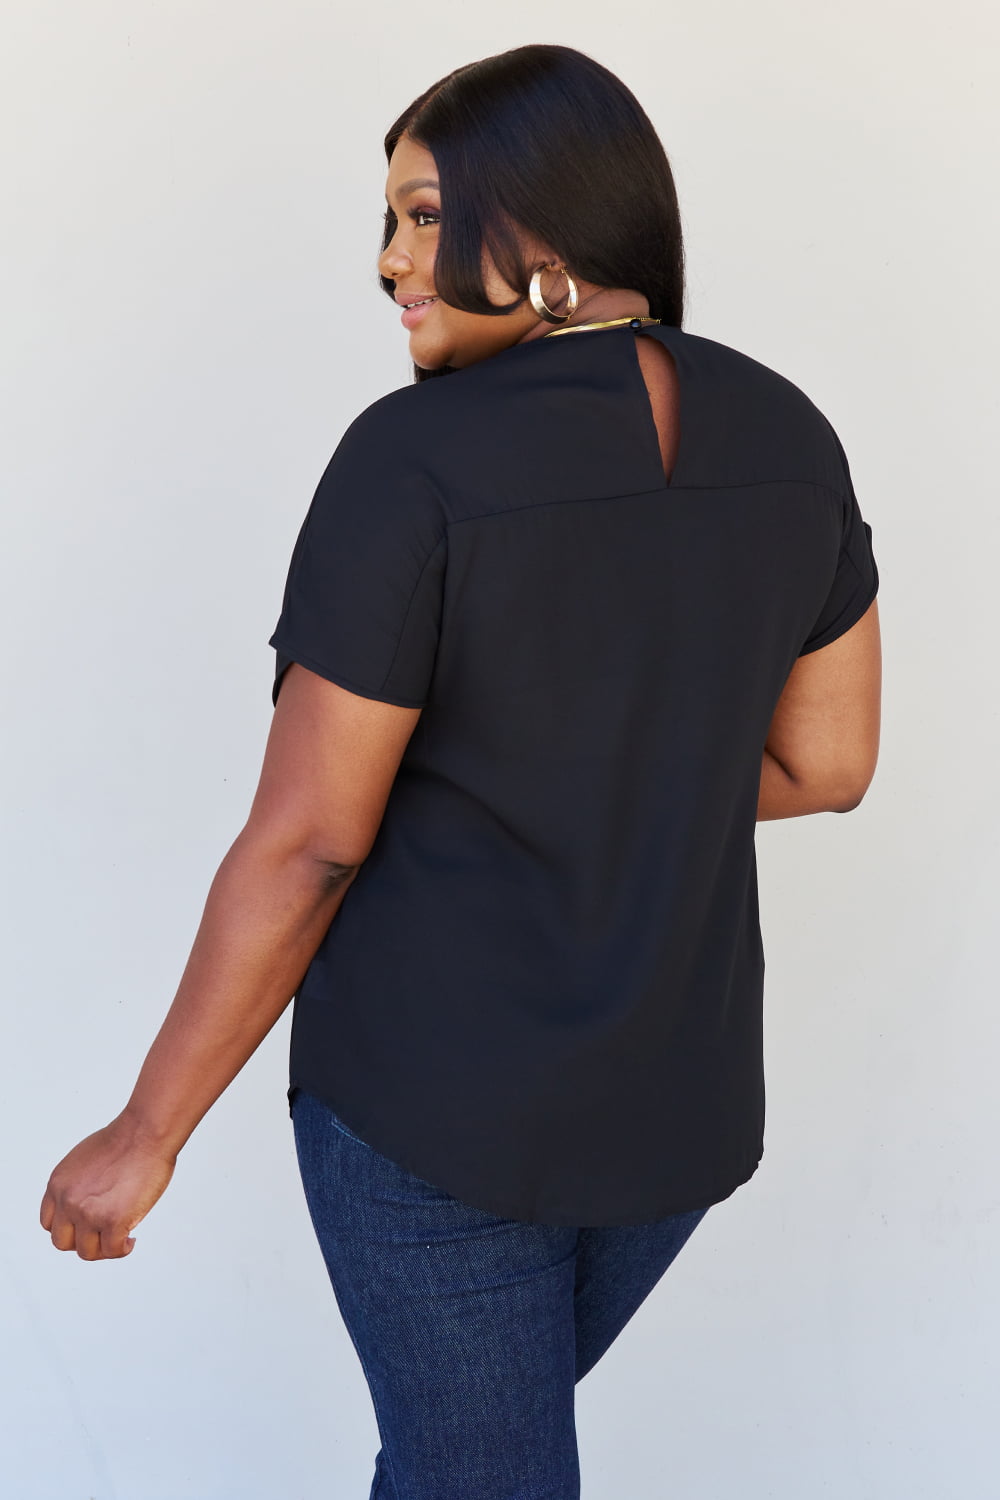 Sew In Love Shine Bright Full Size Center Mesh Sequin Top in Black/Silver-Short Sleeve Tops-Inspired by Justeen-Women's Clothing Boutique in Chicago, Illinois